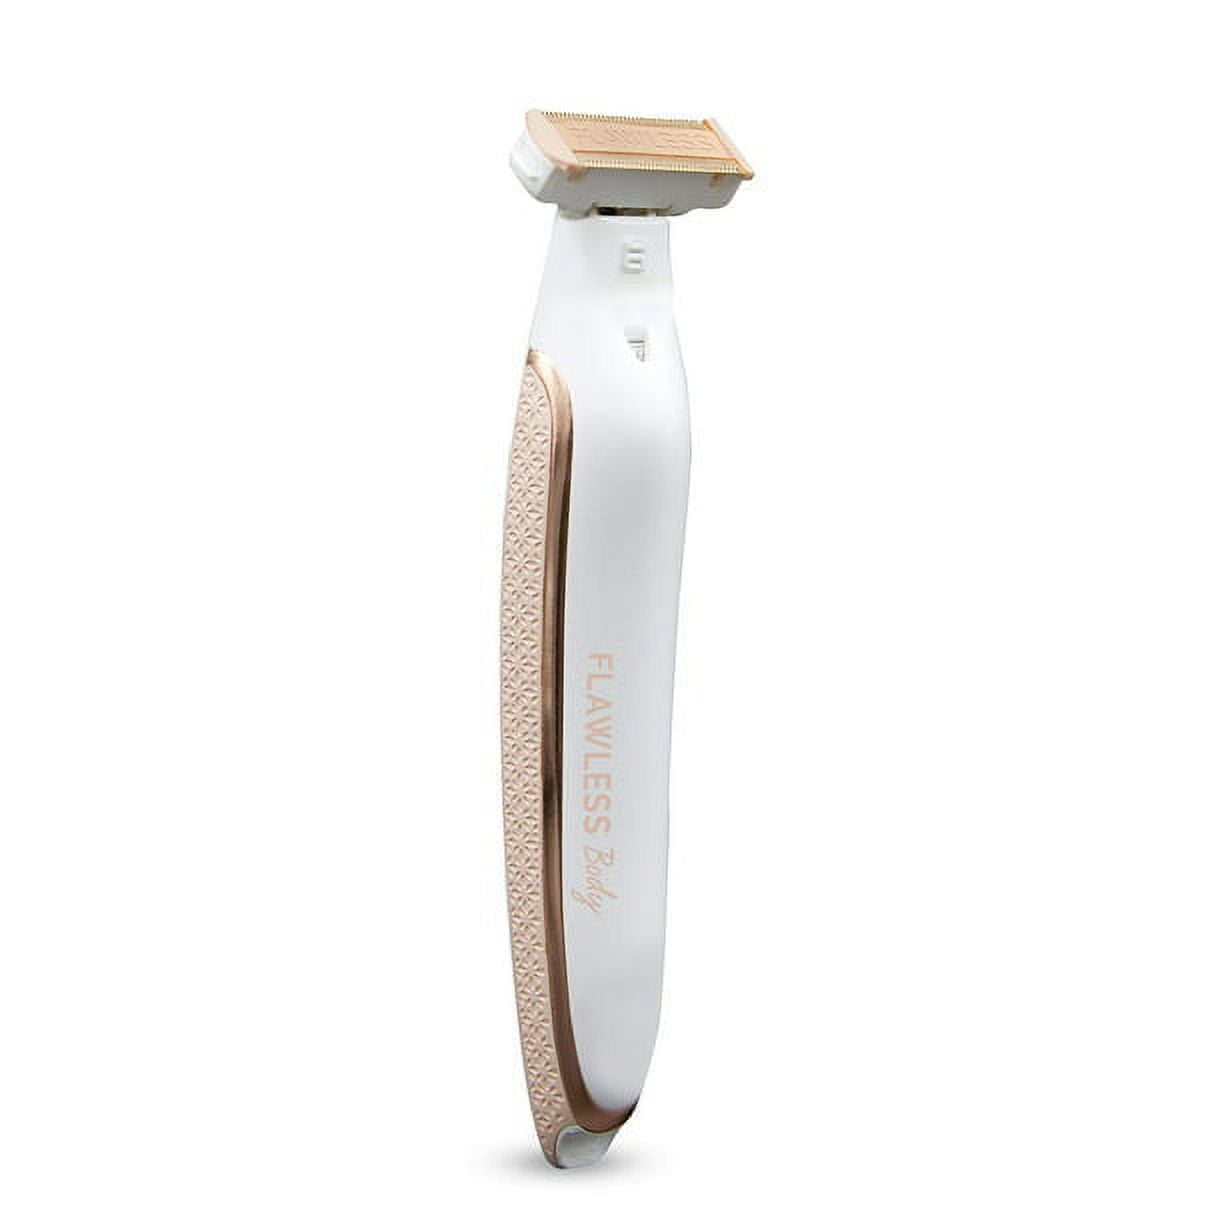 Finishing Touch Flawless Body, Rechargeable Ladies Shaver, As